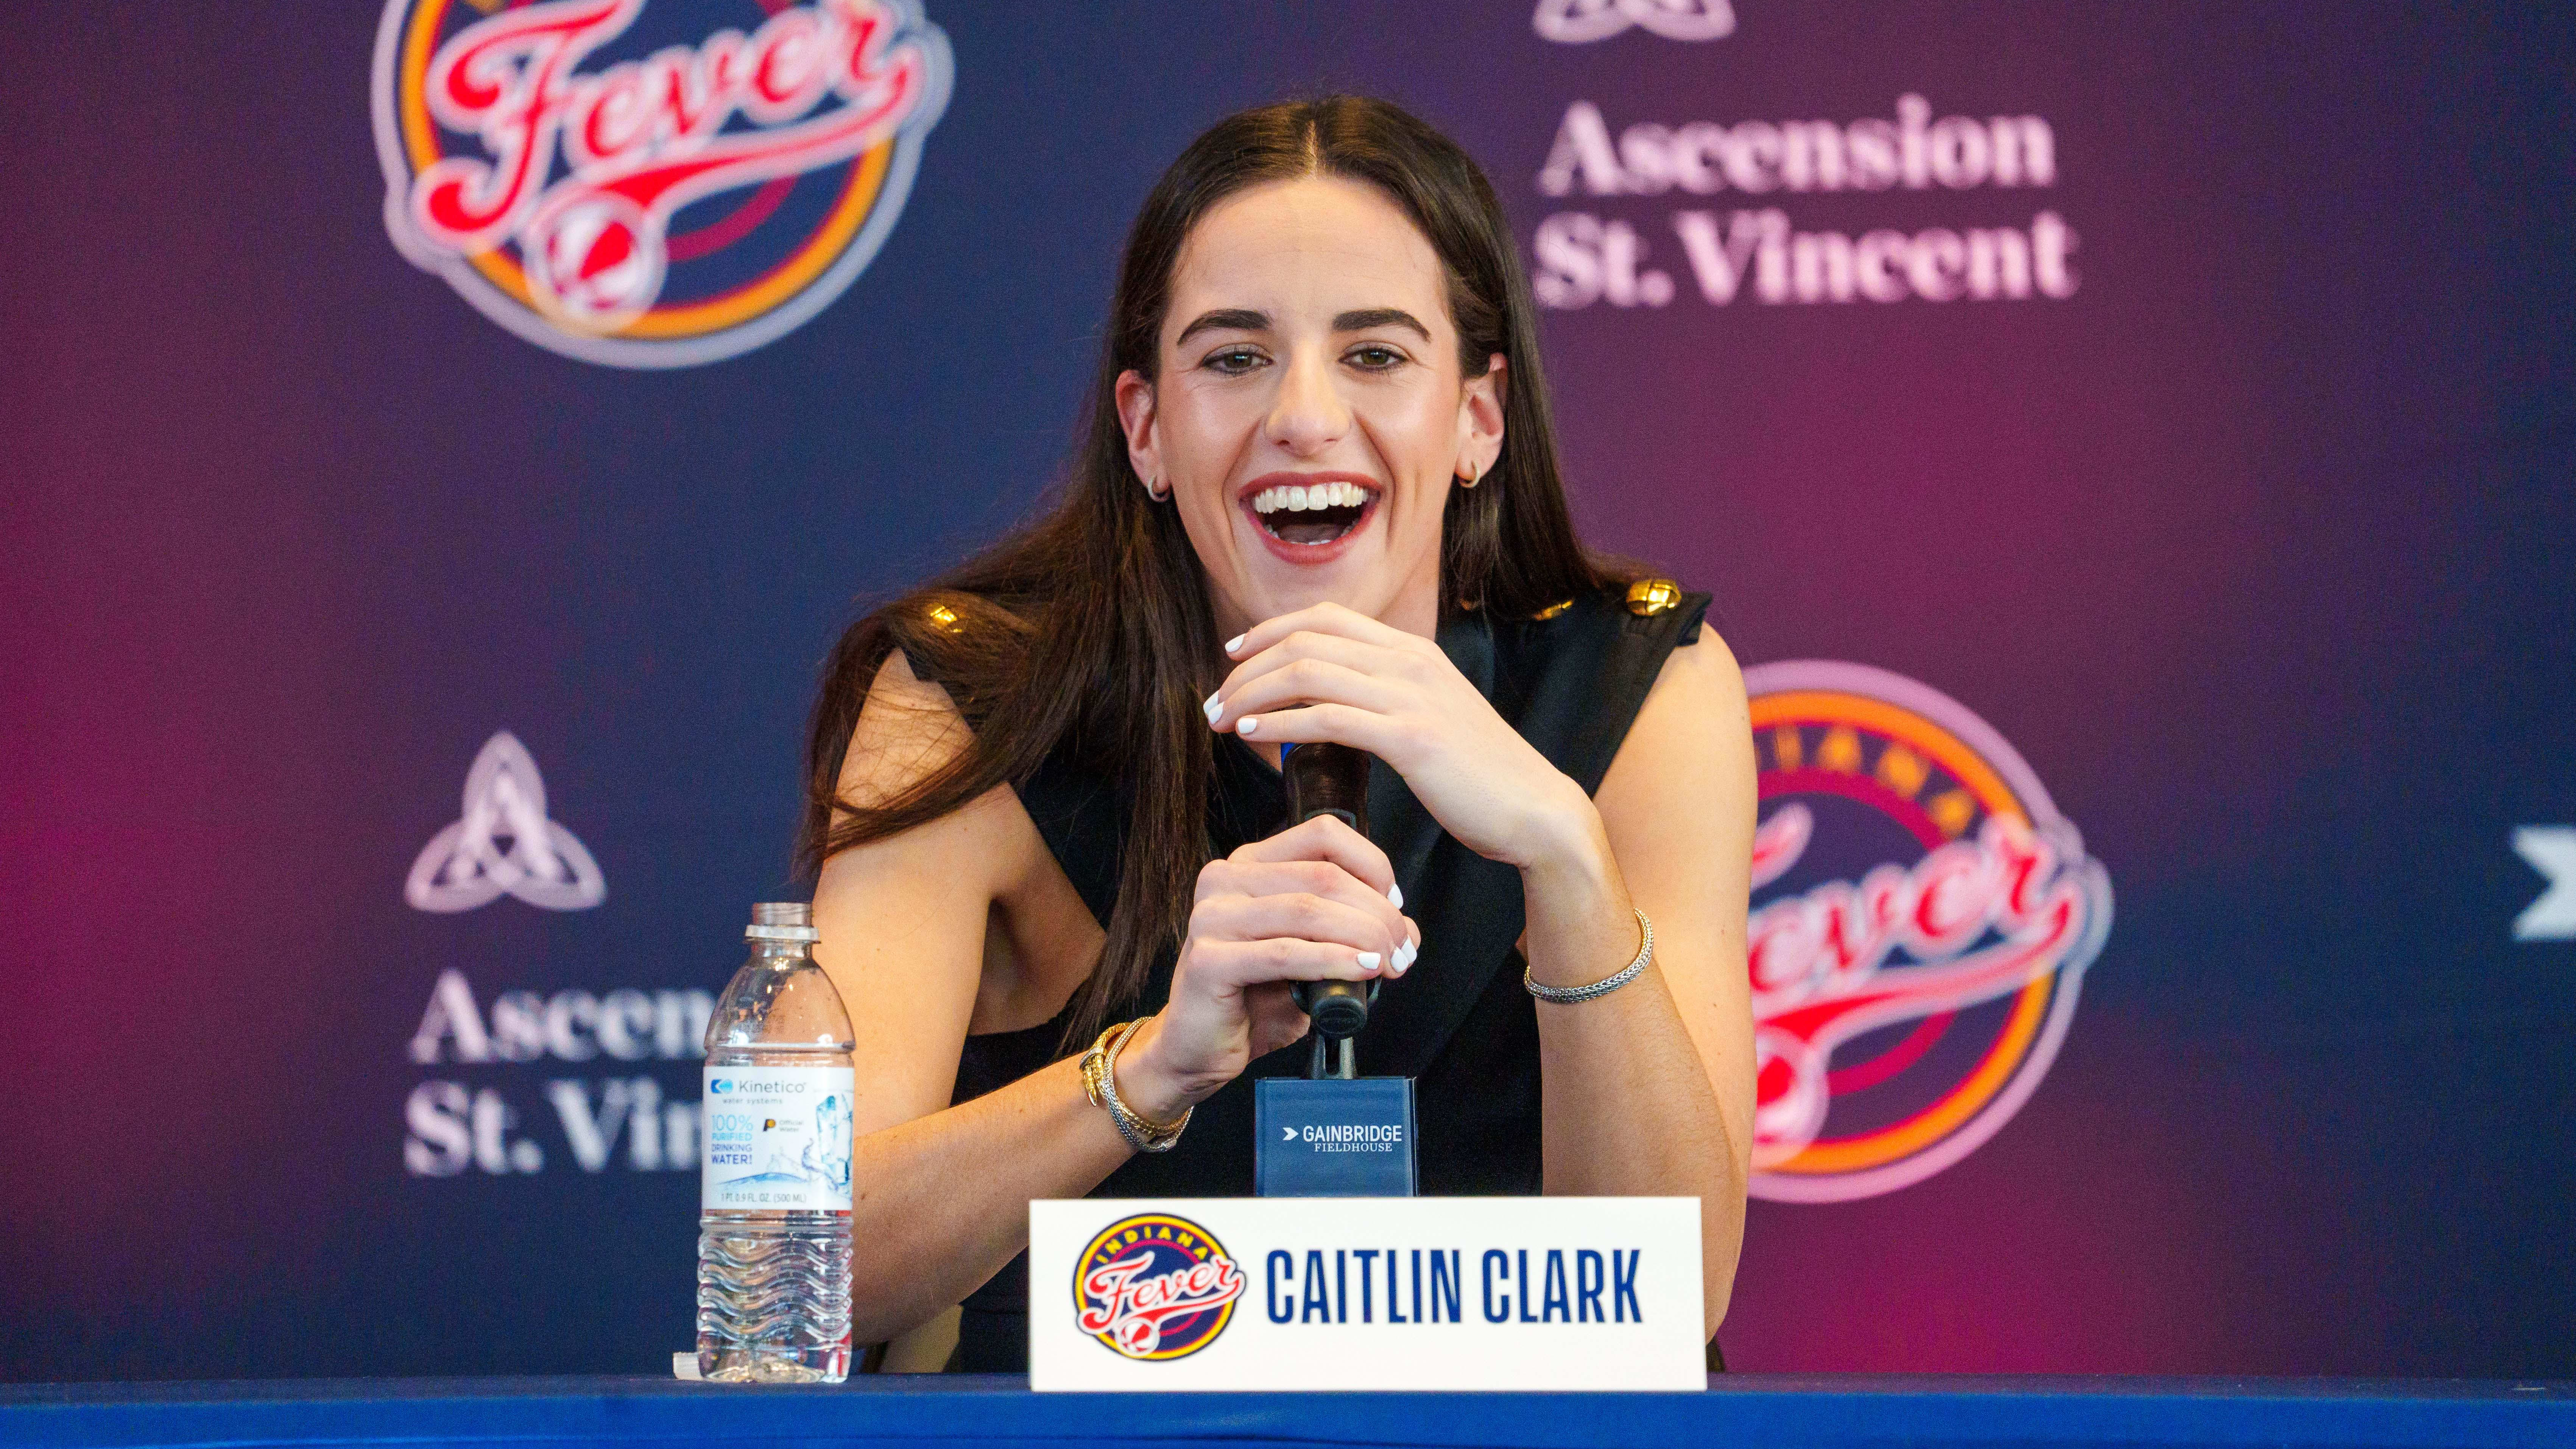 Indiana Fever guard Caitlin Clark speaks at a press conference.